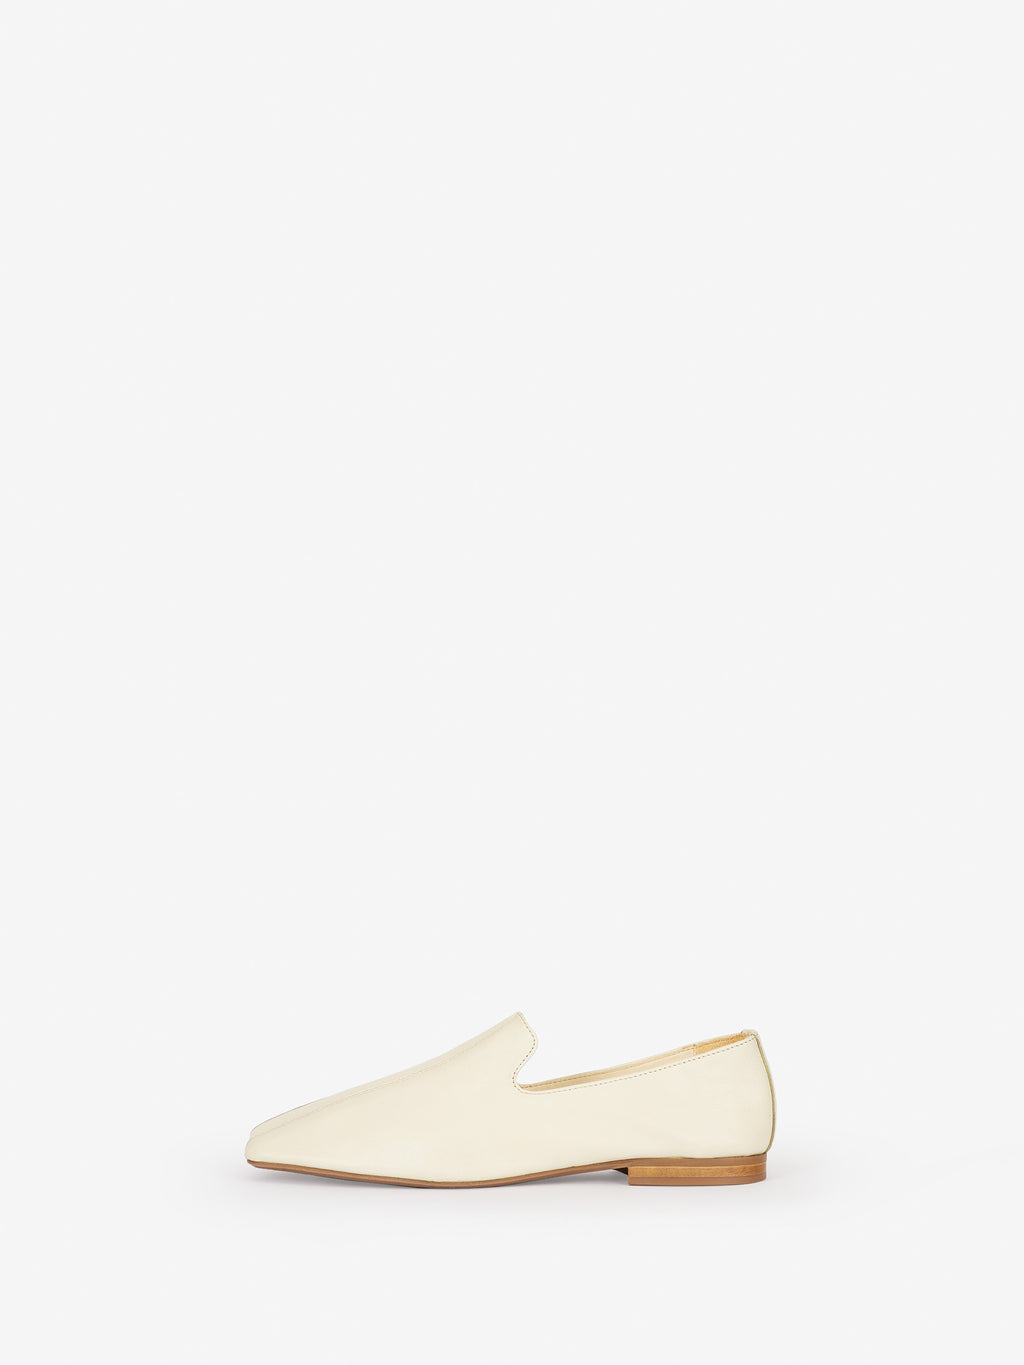 Comfy and chic loafer with a super soft decnstructed construction vanilla colorway viewed from side 